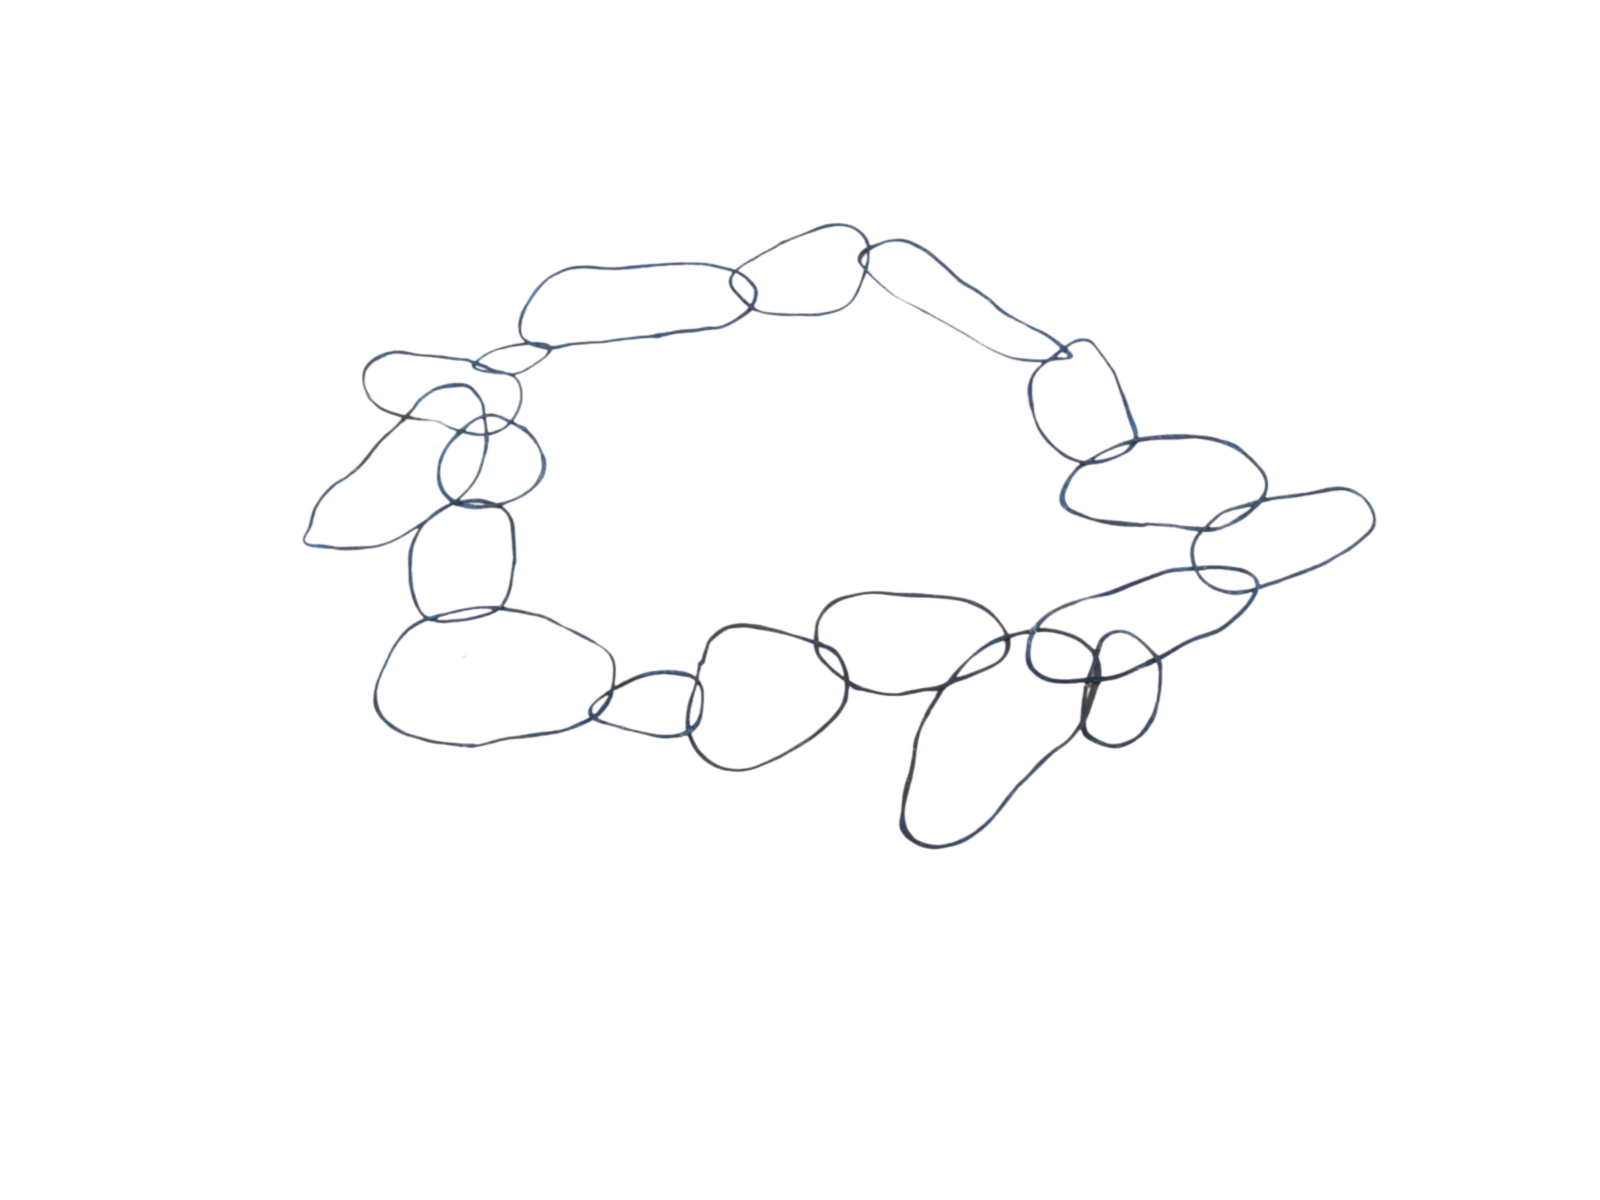 fleeting shapes necklace 2